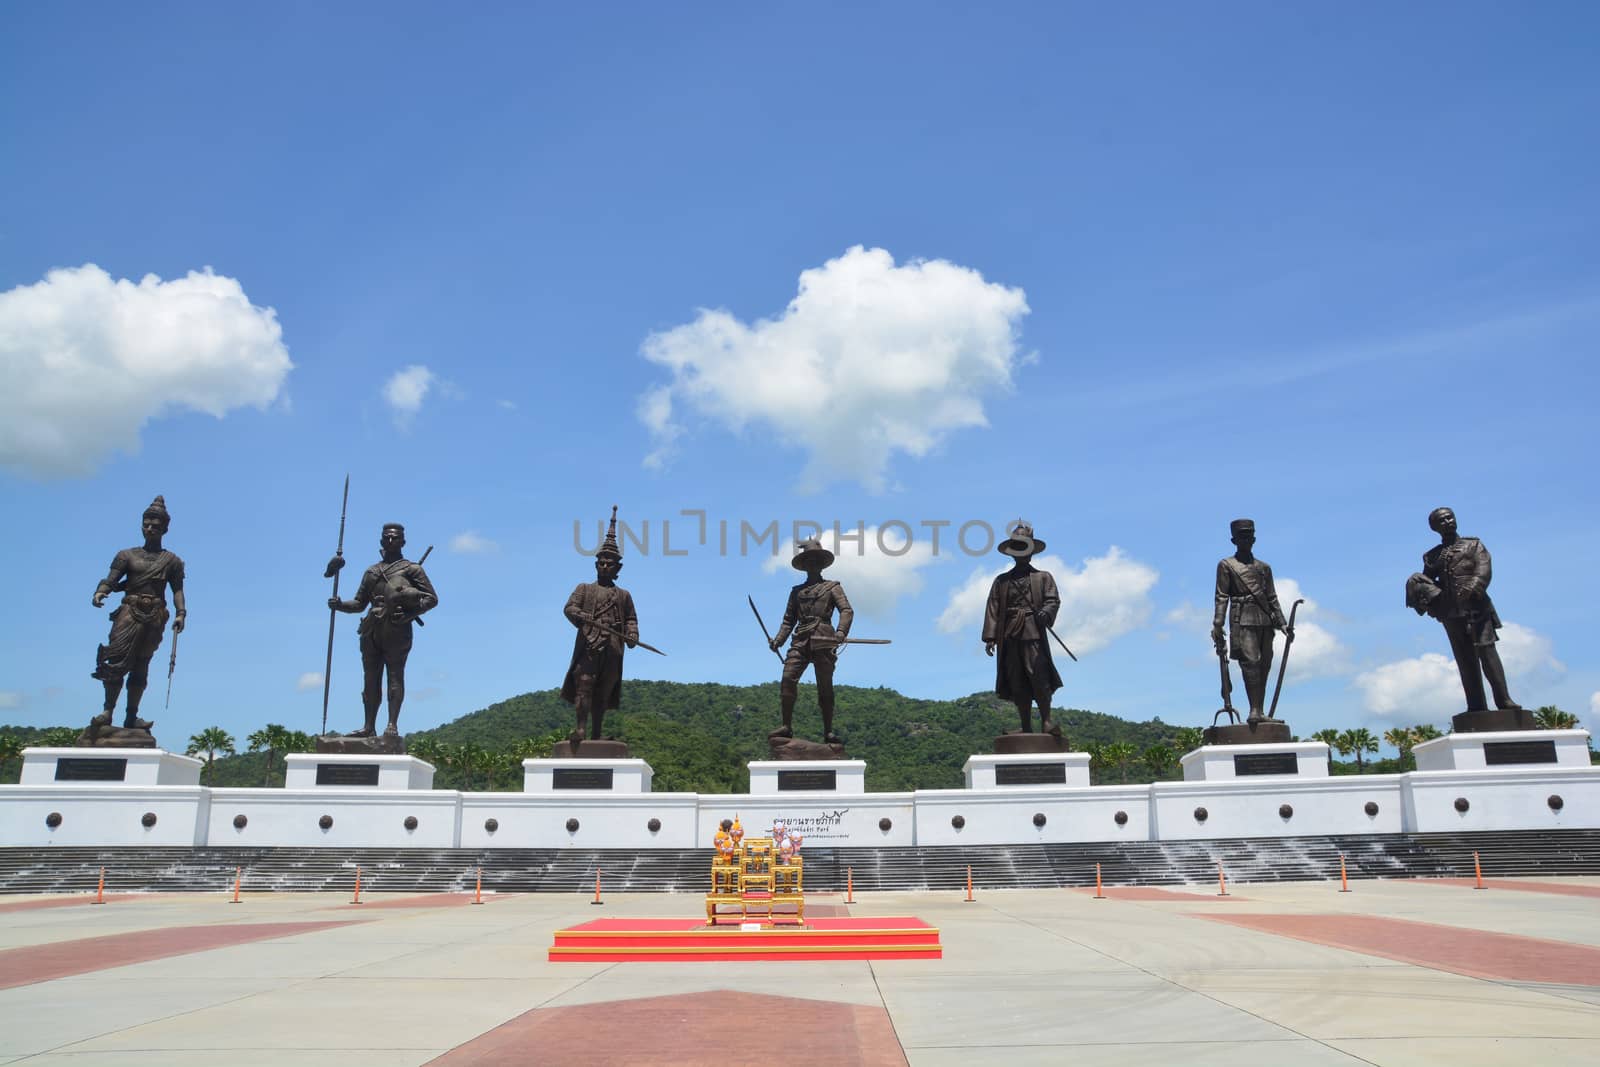 7 Kings giant statues, Statues of famous Thai Kings in Rajabhakti Park, is a historically themed park honouring past Thai kings from the Sukhothai period to the current royal house of Chakri